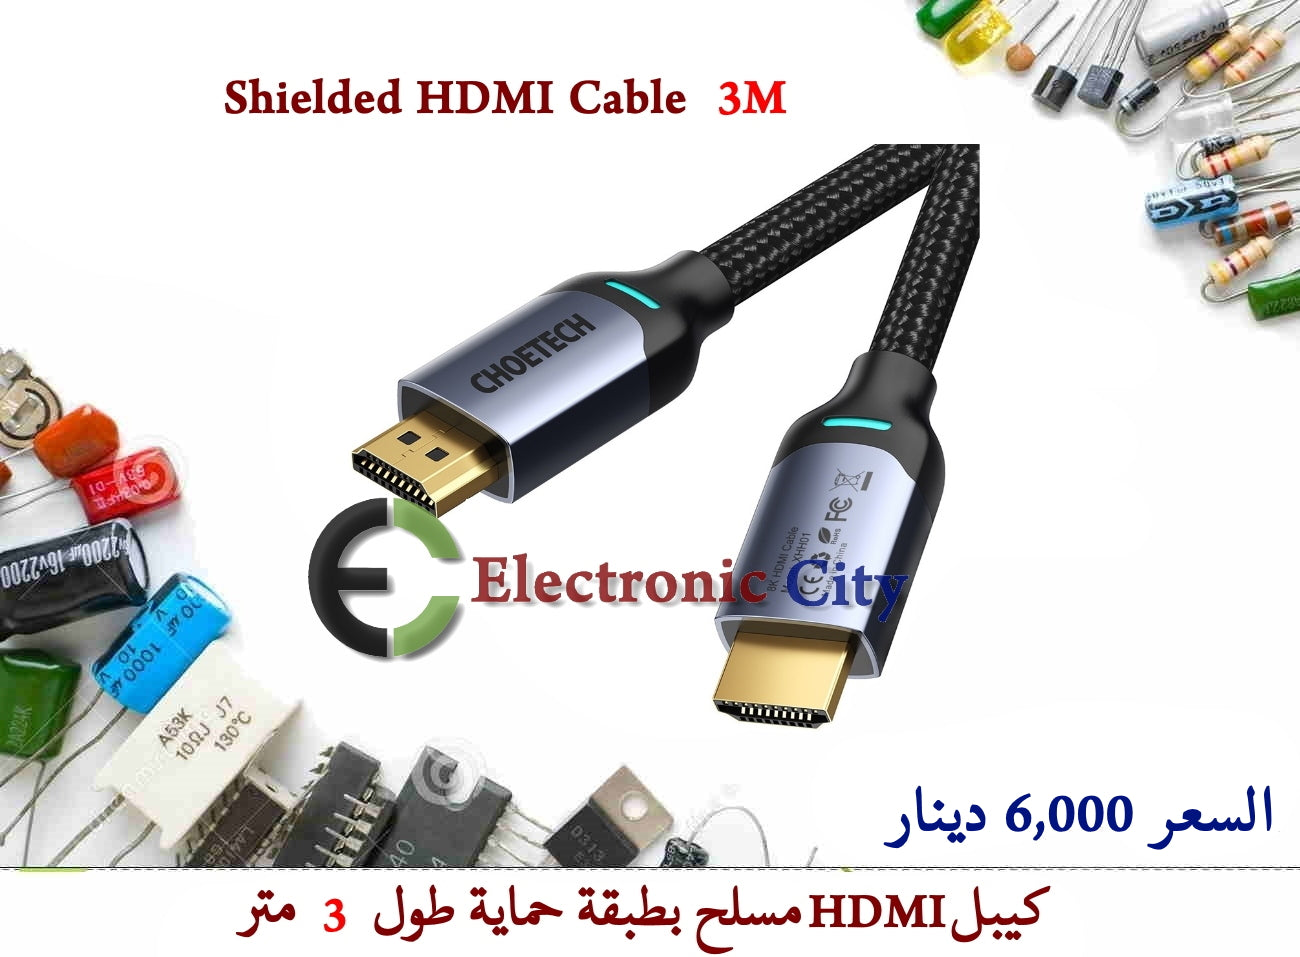 Shielded HDMI Cable 3M